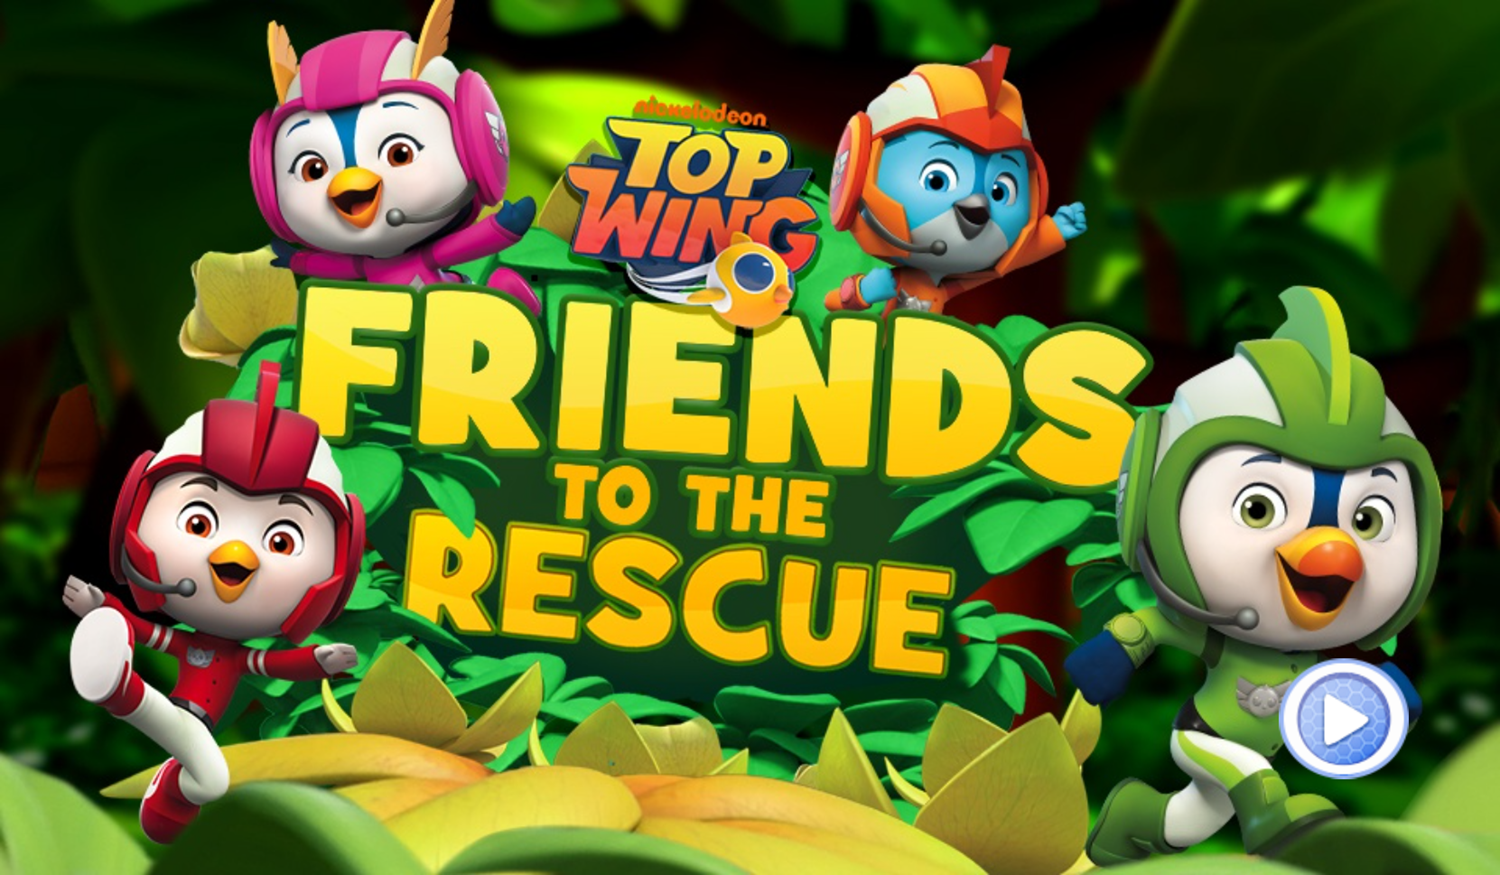 Top Wing Friends to the Rescue Game Welcome Screen Screenshot.